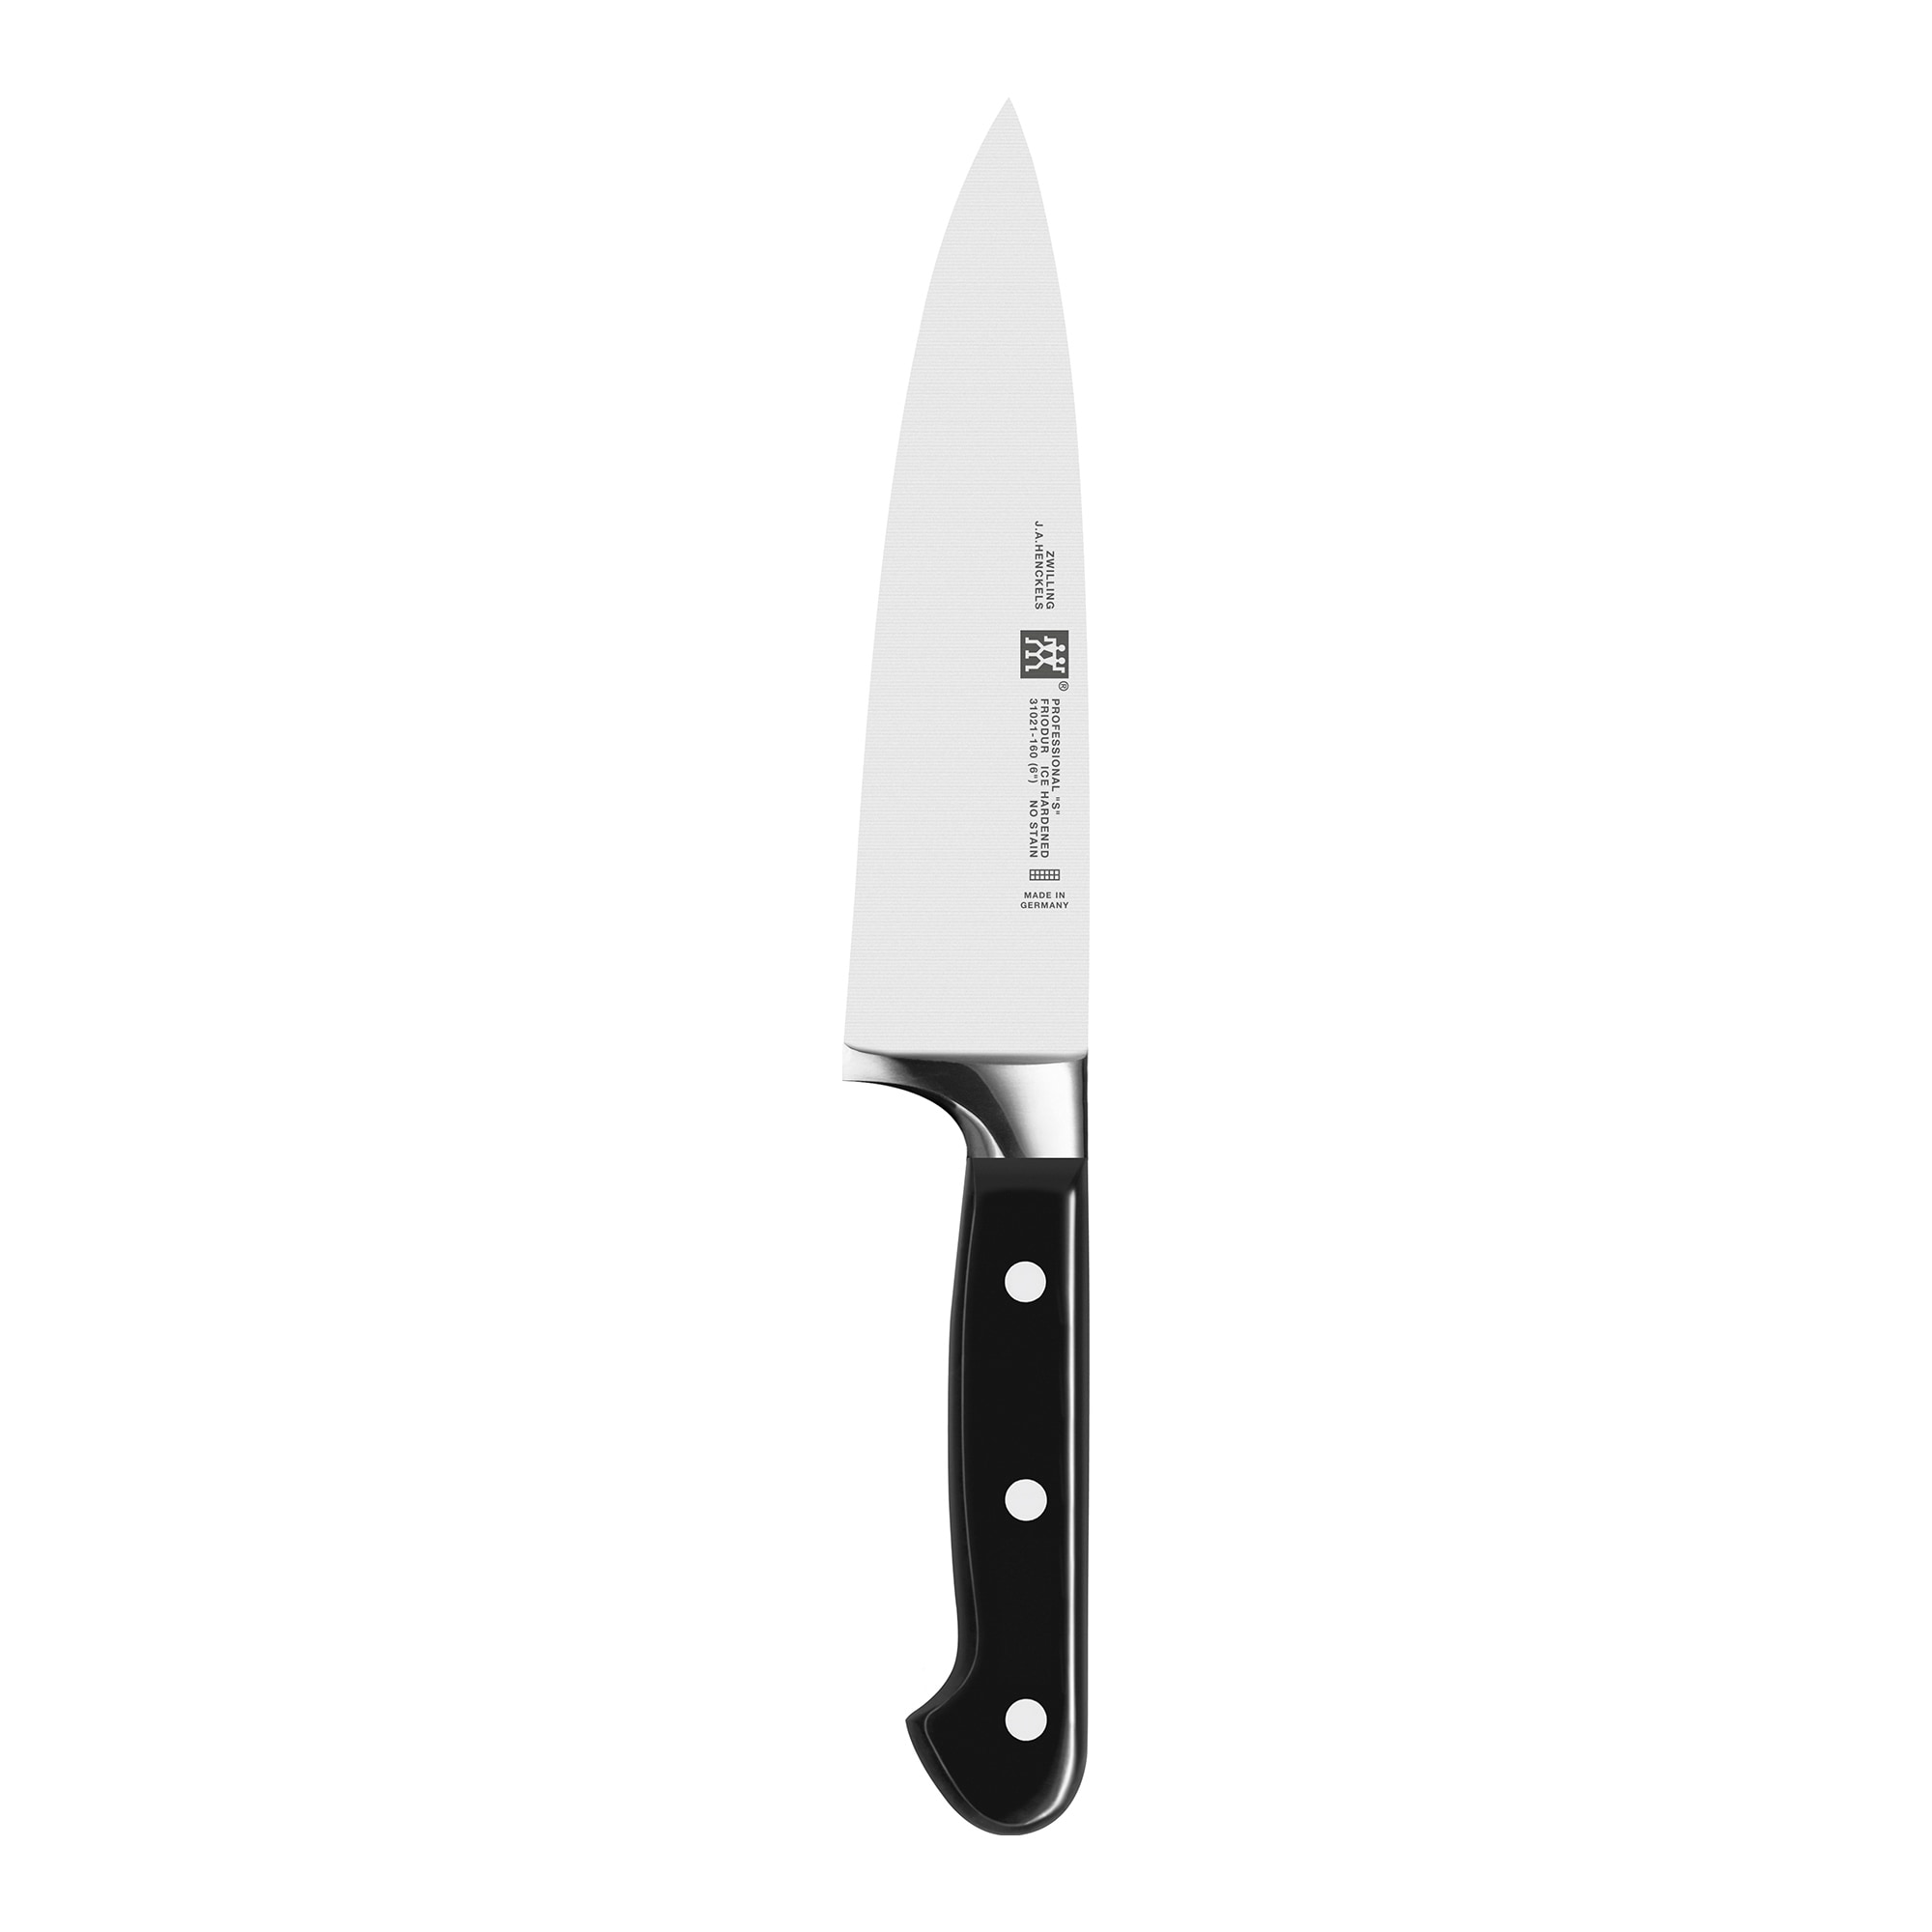 https://ak1.ostkcdn.com/images/products/is/images/direct/58e86716678556b59bc860906f3b73d4c6e23887/ZWILLING-Professional-%22S%22-Chef%27s-Knife.jpg